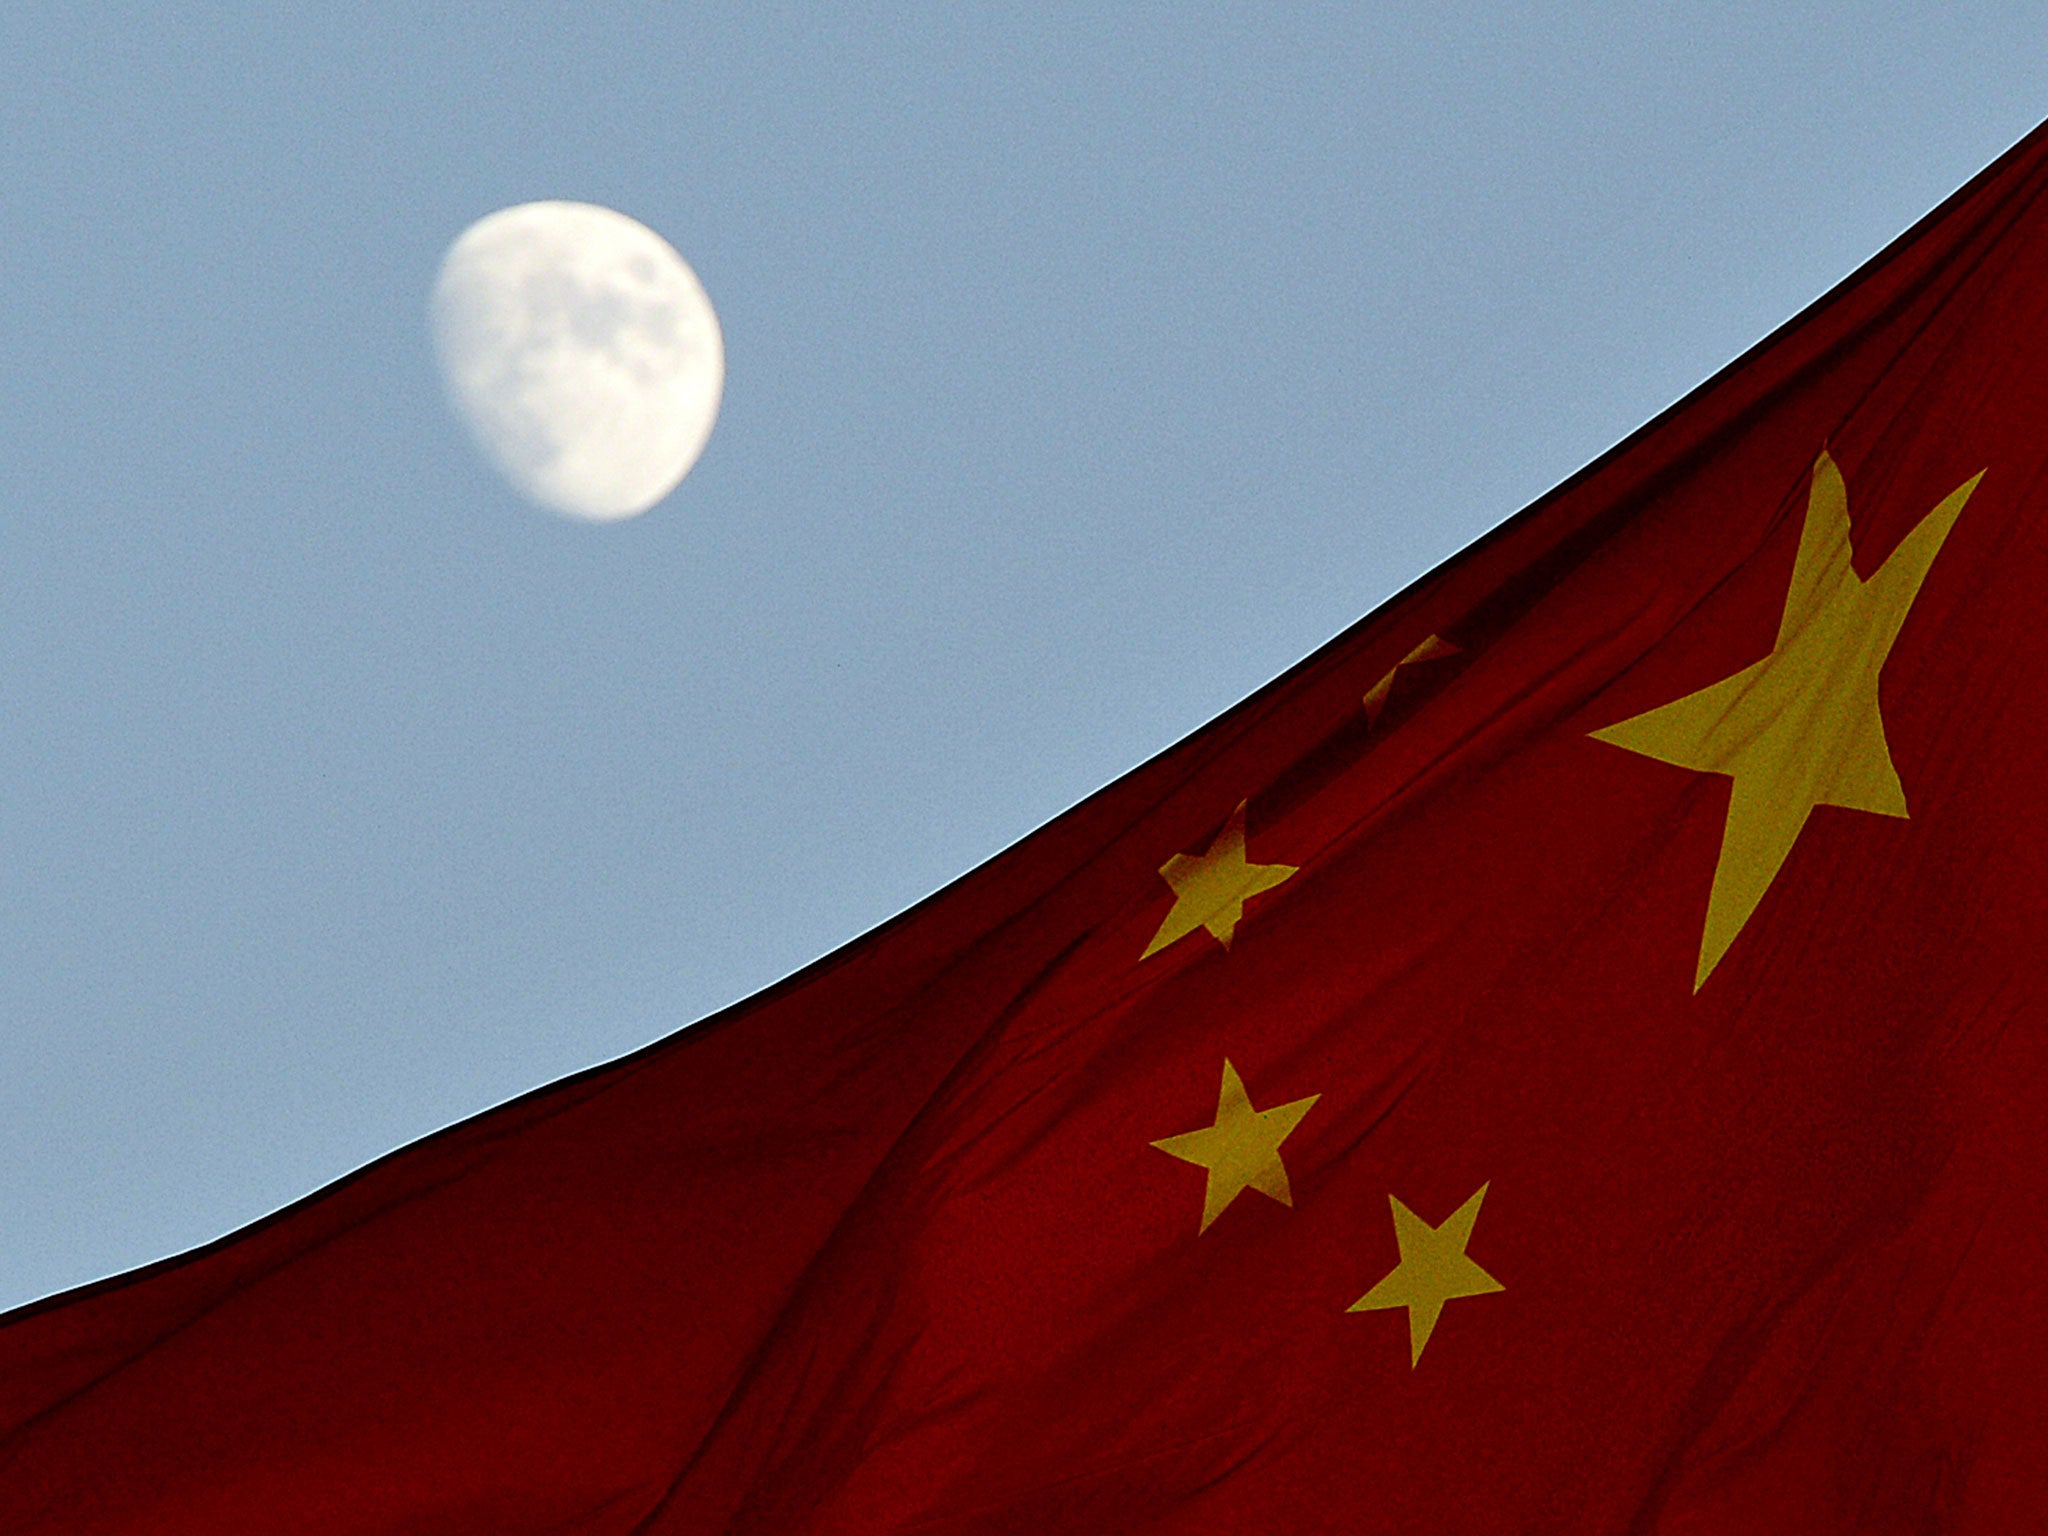 The Chinese flag is seen in front of a view of the moon at Tiananmen Square in Beijing on December 13, 2013. China's first lunar rover which entered the moon's orbit last week is expected to makes it's planned landing on the moon's surface on December 14.